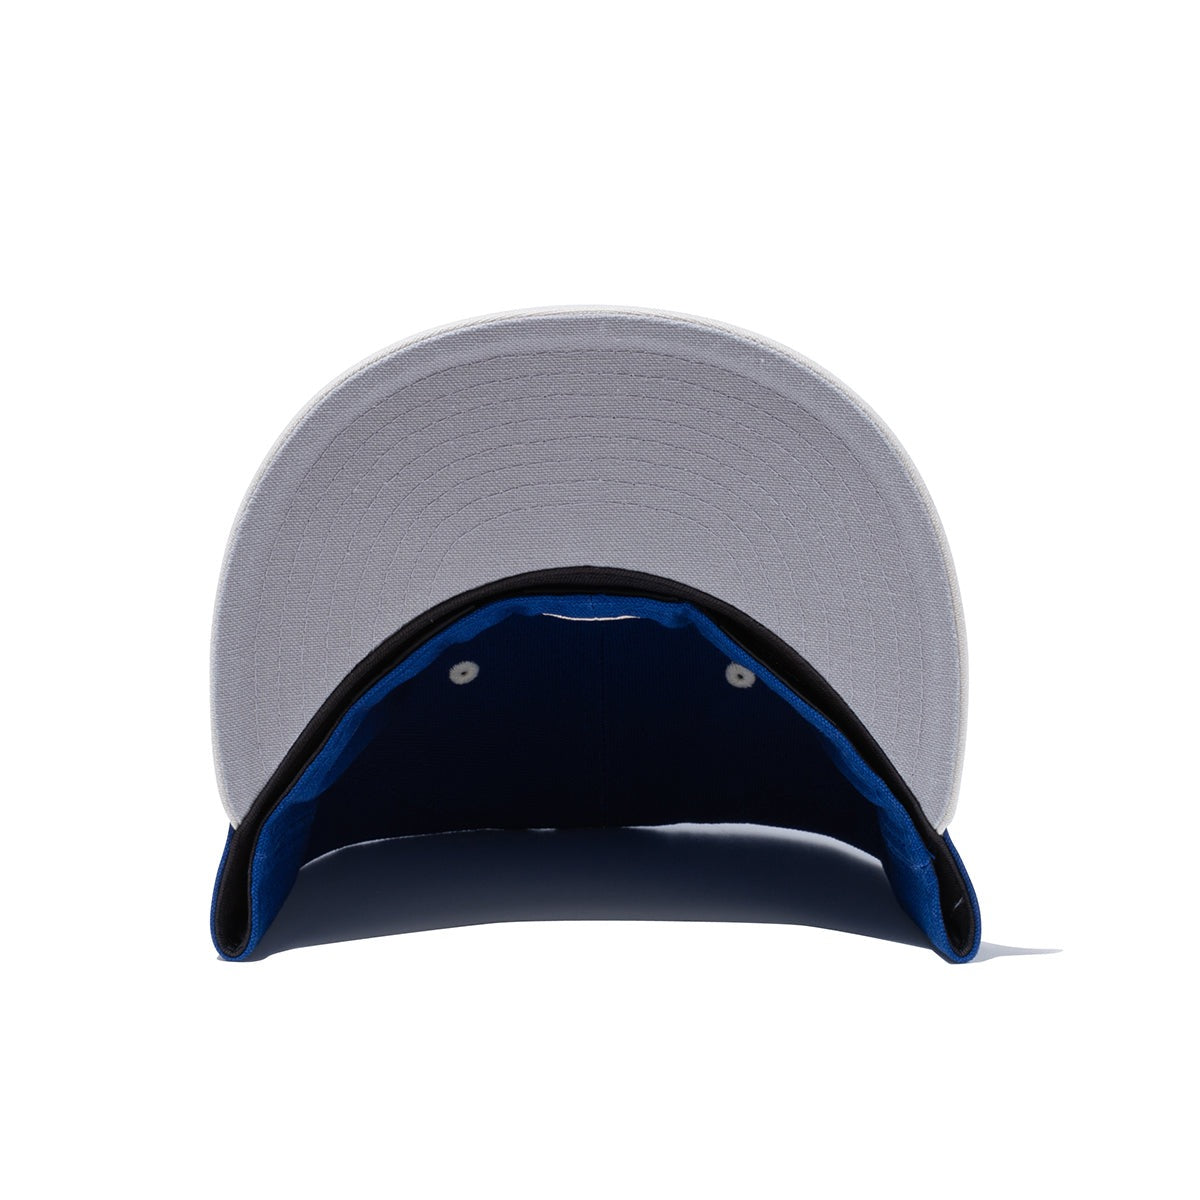 LOS ANGELES DODGERS Duck Canvas 59FIFTY